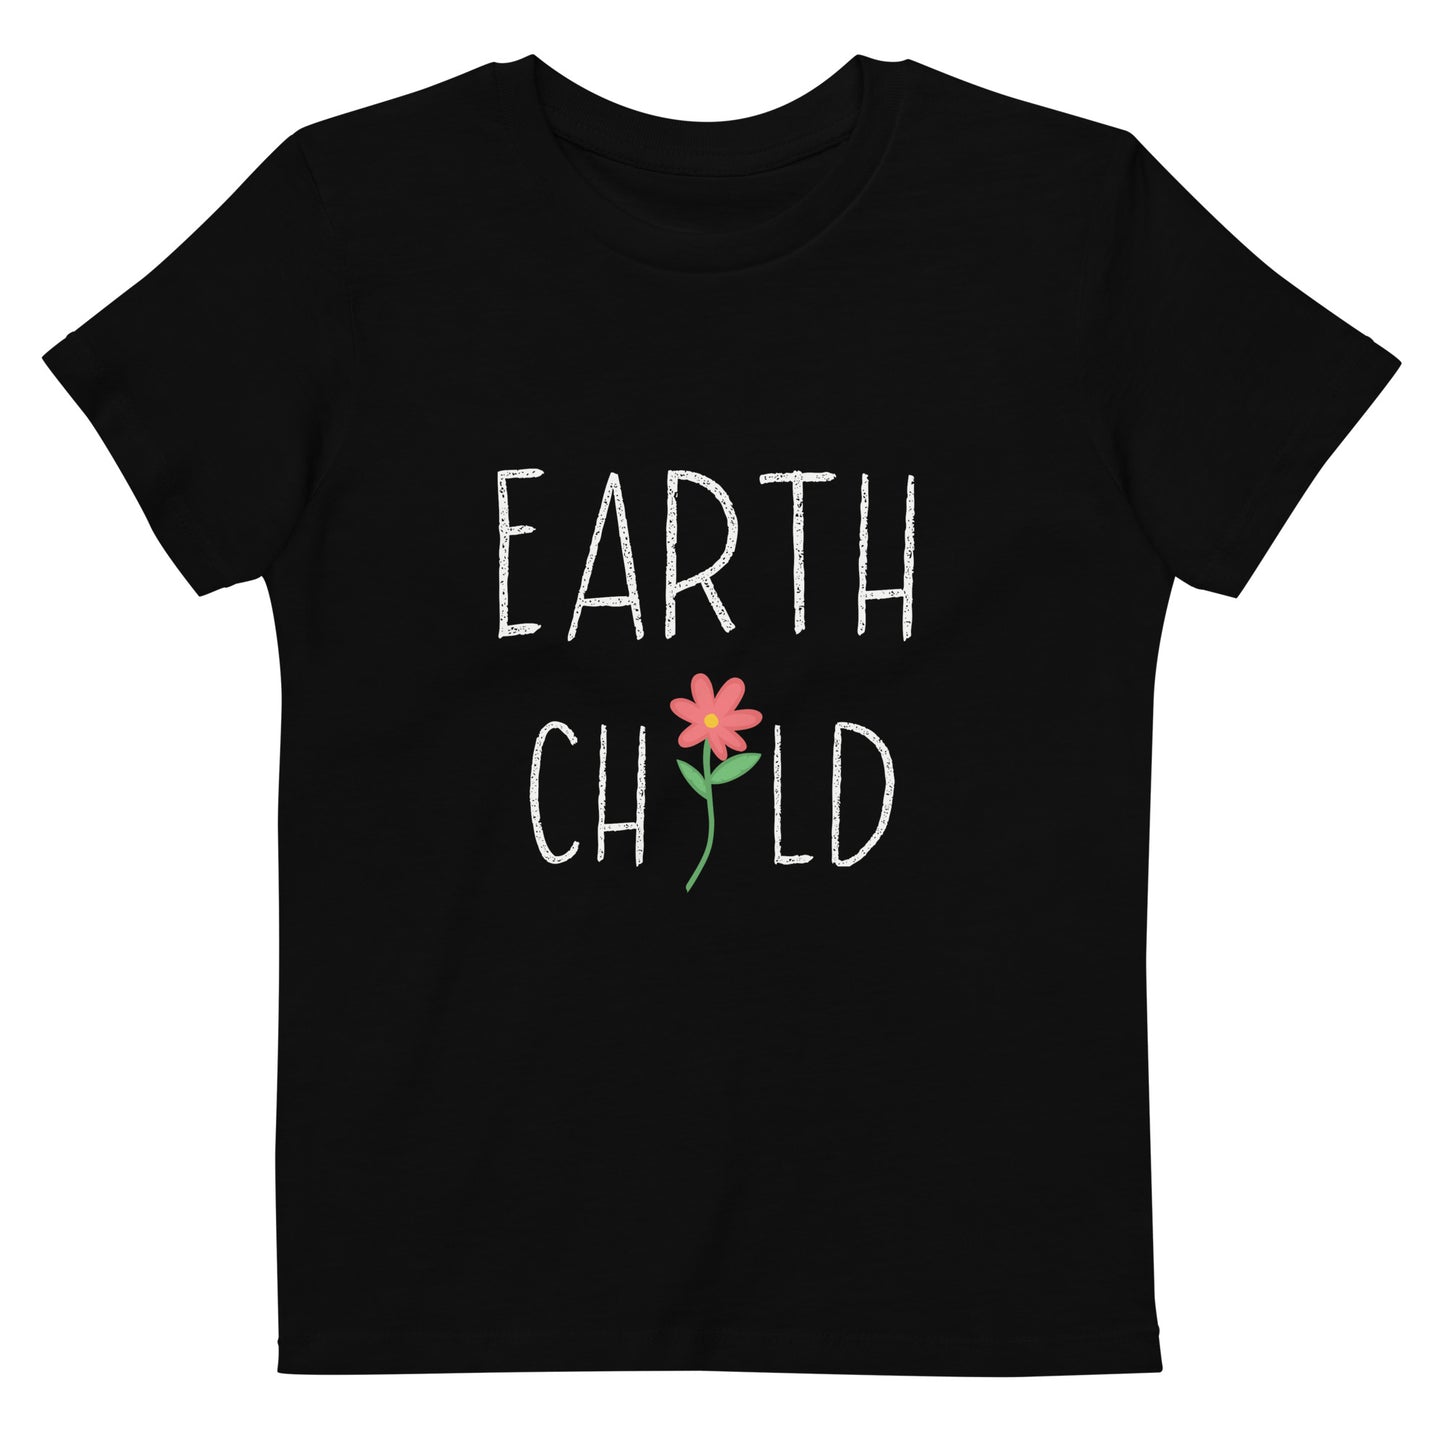 Kids Black Organic T-Shirt - Earth Child, Front View Graphic with flower